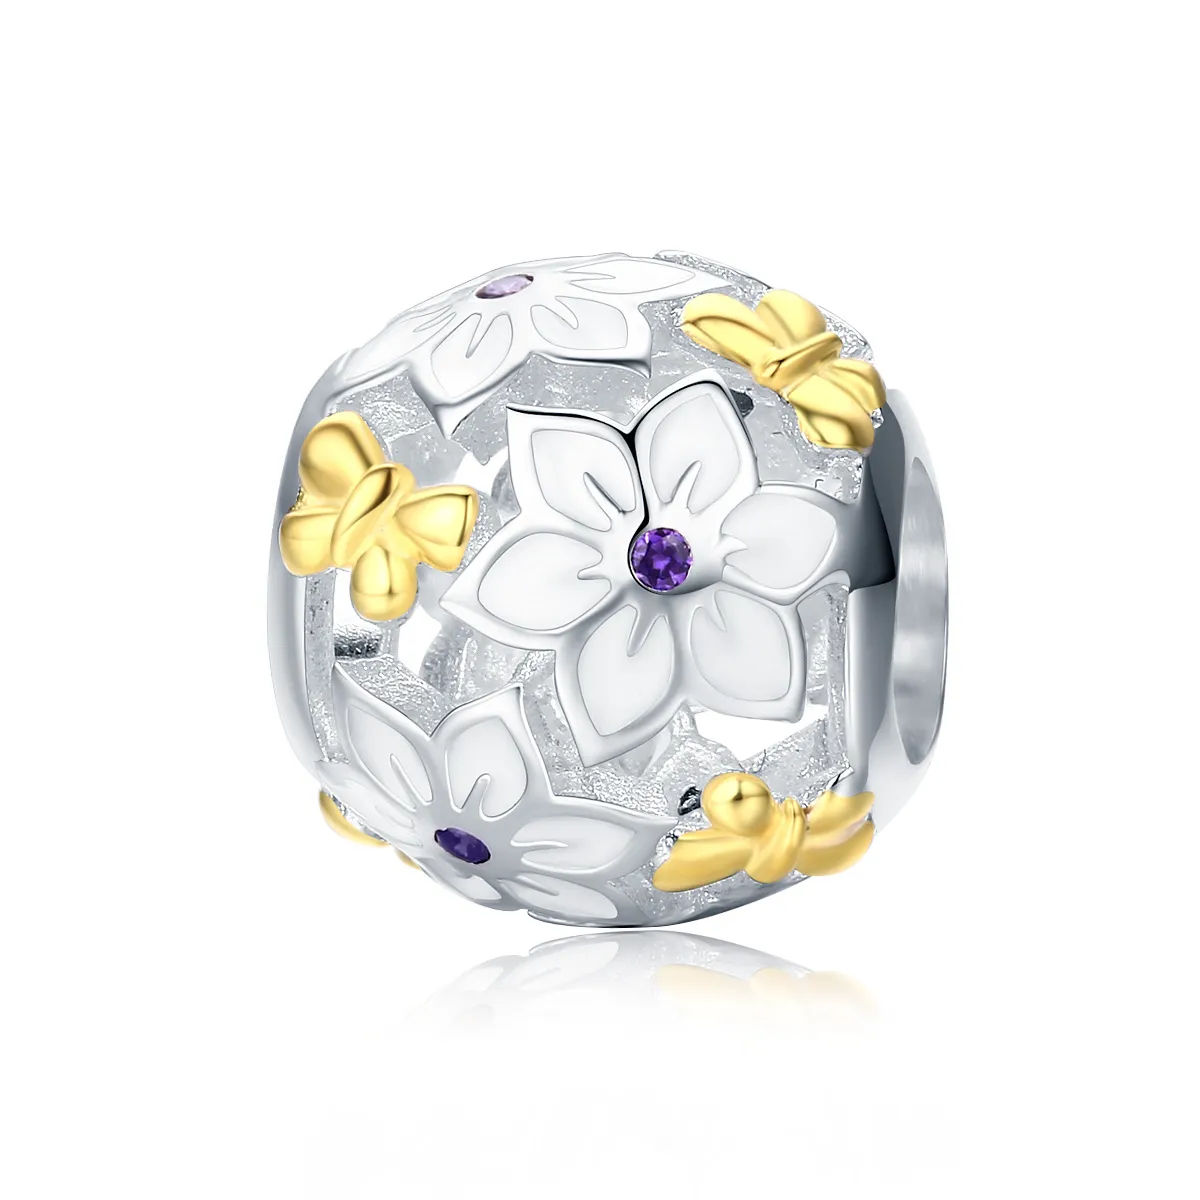 Pandora Style Two Tone Bicolor Flowers And Butterflies Charm - SCC546